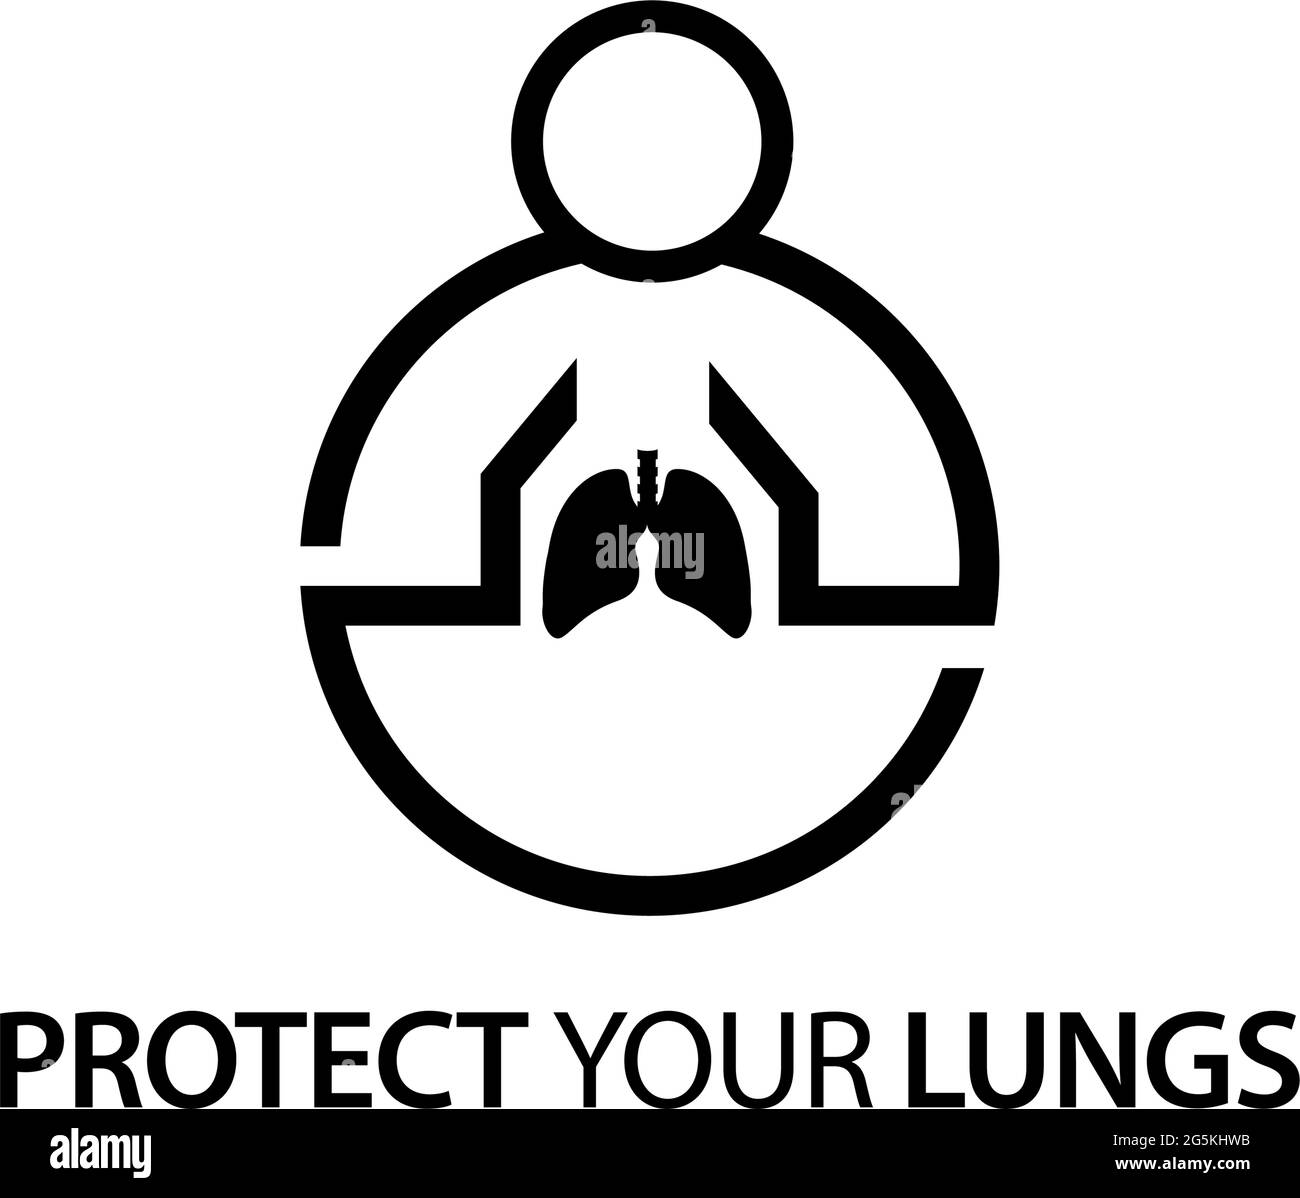 People with lungs icon. Concept of love your lungs. Stock Vector